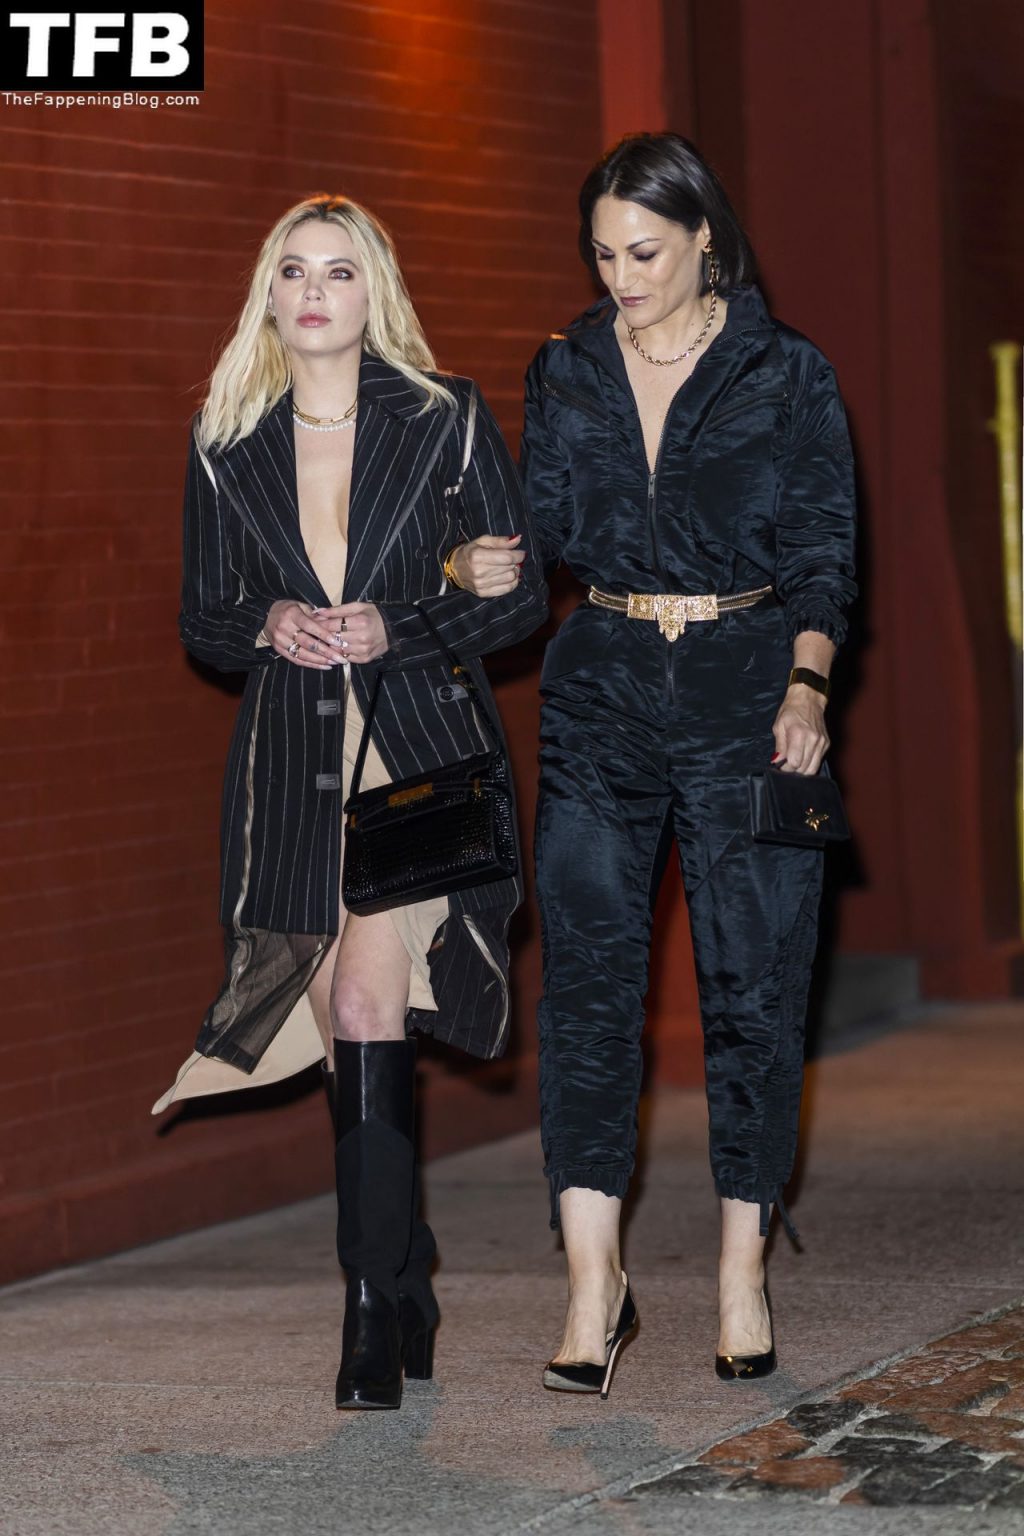 Ashley Benson Sexy The Fappening Blog 5 1024x1536 - Ashley Benson and a Girlfriend Look Fashionable as They Head to Dinner in NYC (5 Photos)